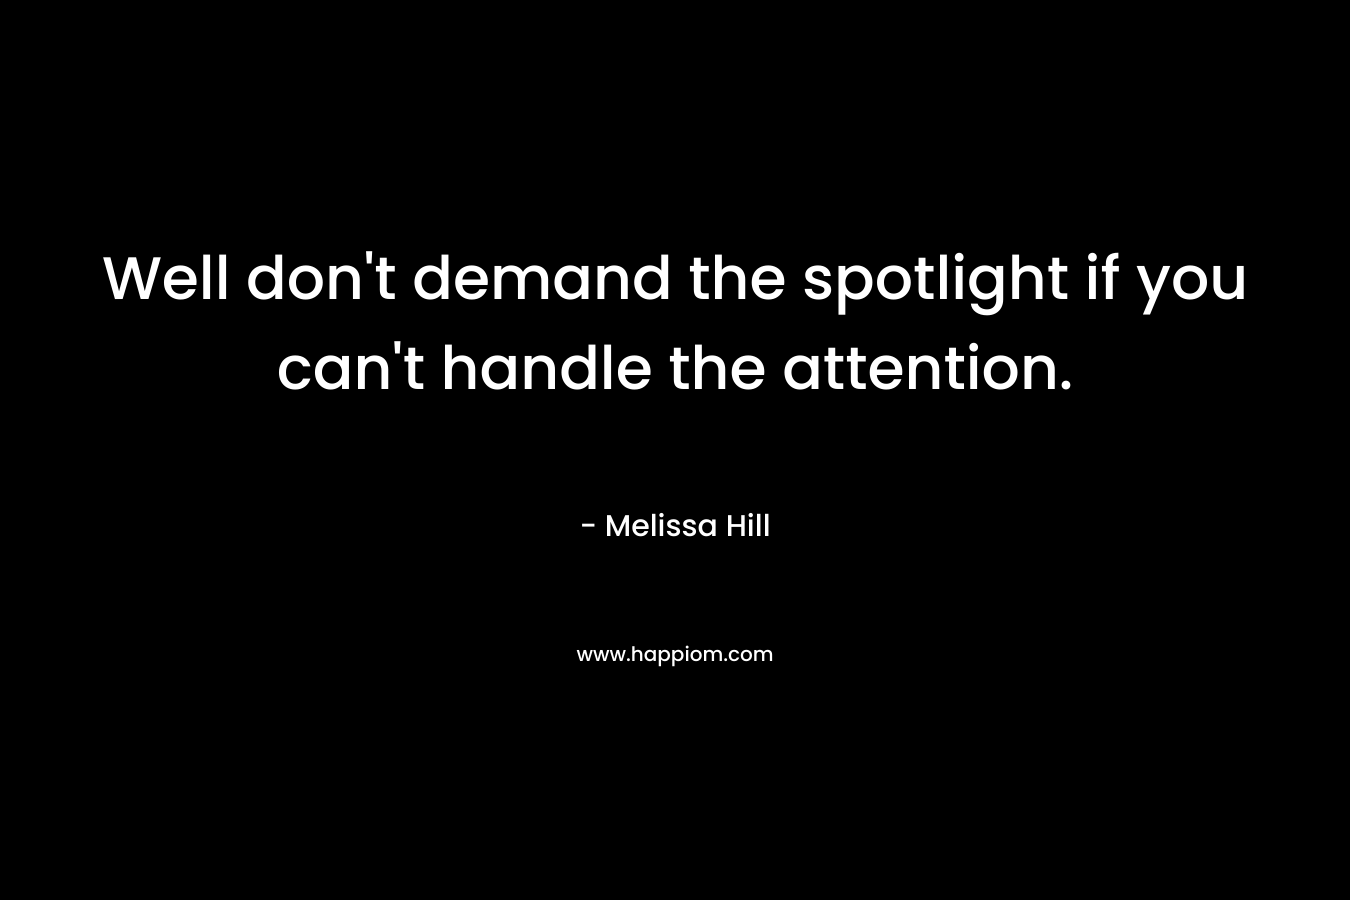 Well don't demand the spotlight if you can't handle the attention.